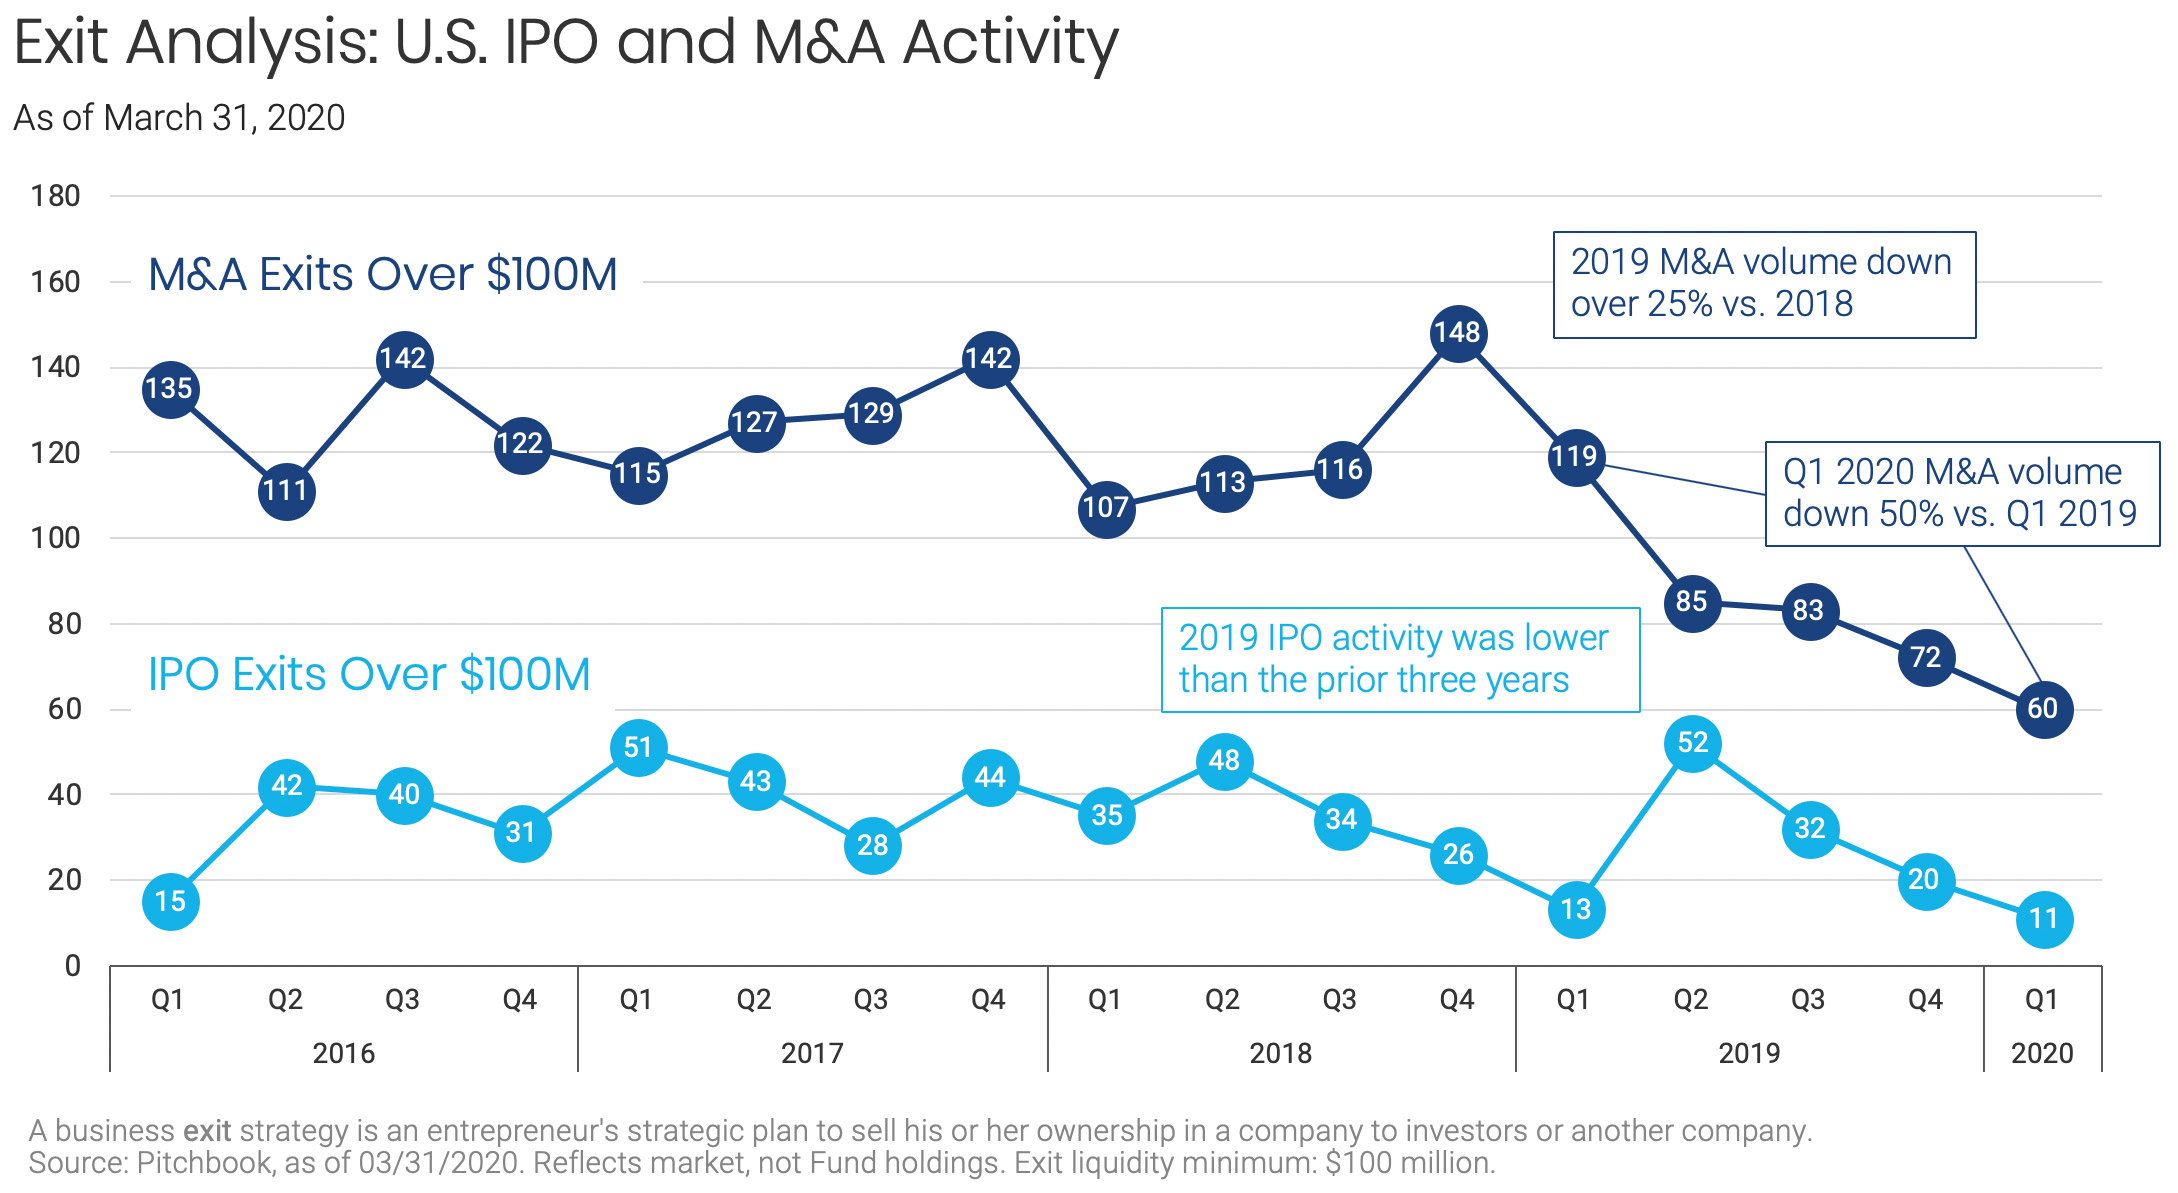 Exit Analysis: U.S. IPO and M&A Activity